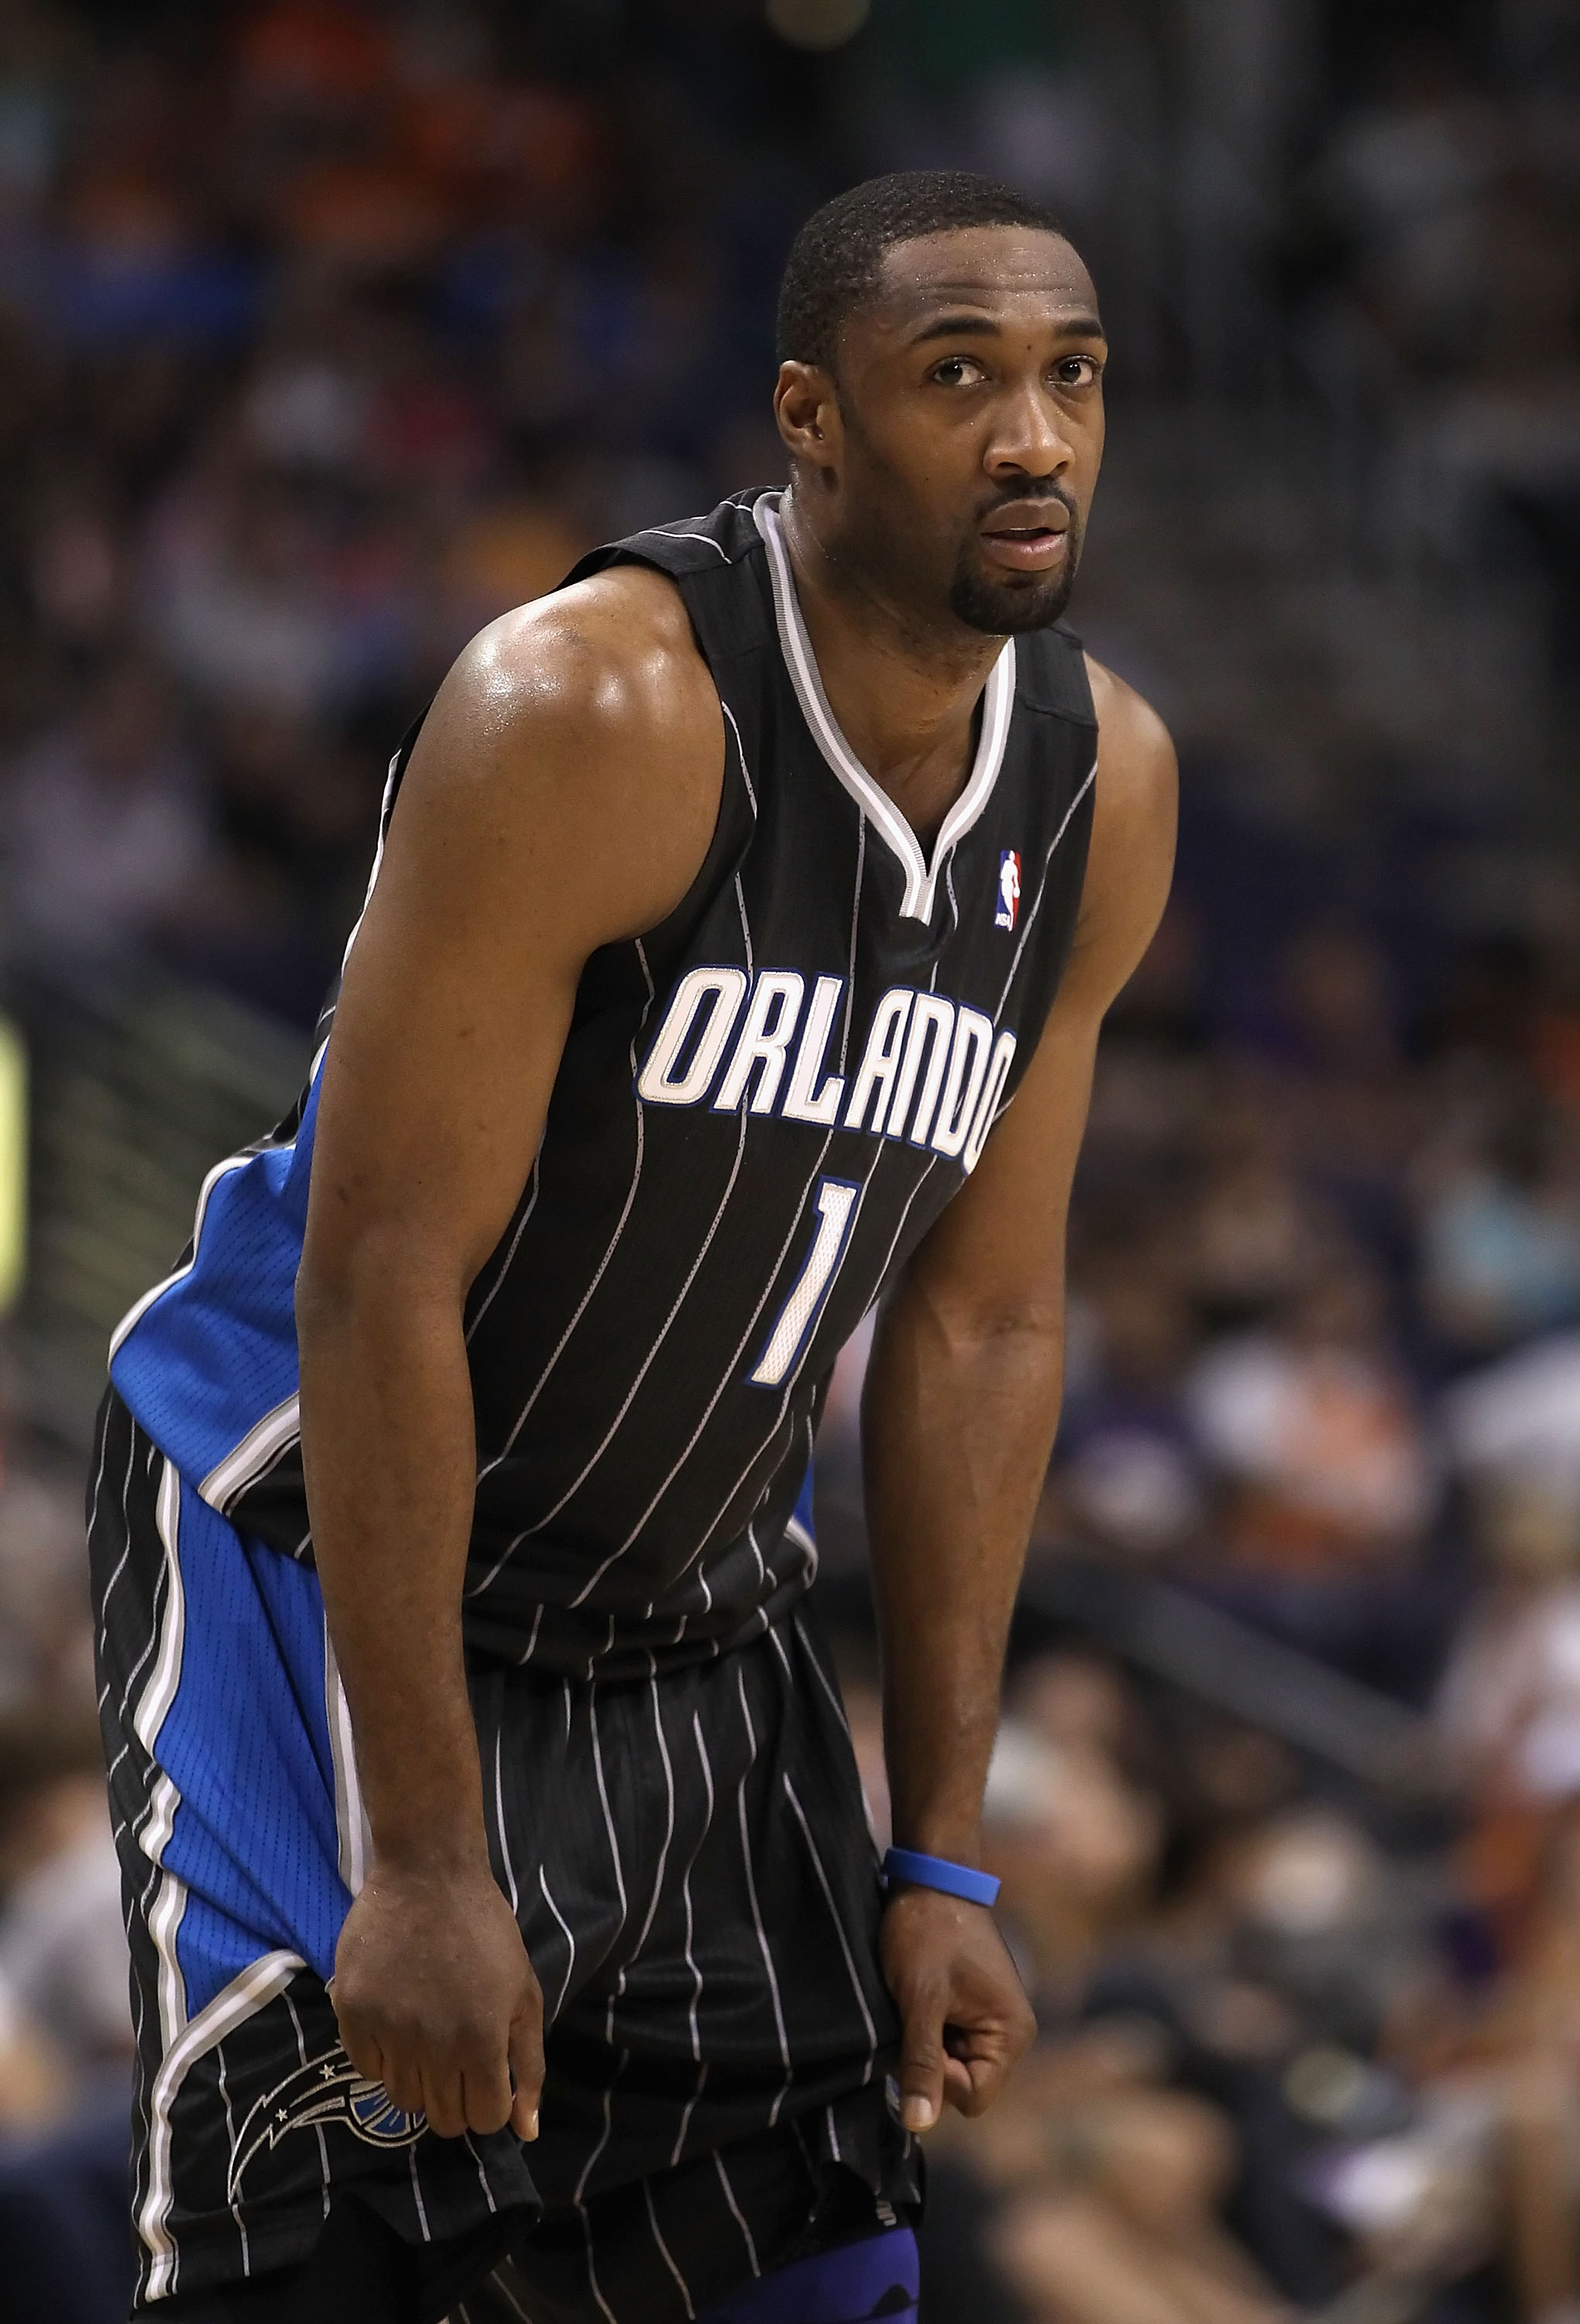 PHOENIX, AZ - MARCH 13:  Gilbert Arenas #1 of the Orlando Magic during the NBA game against the Phoenix Suns at US Airways Center on March 13, 2011 in Phoenix, Arizona.  NOTE TO USER: User expressly acknowledges and agrees that, by downloading and or usin